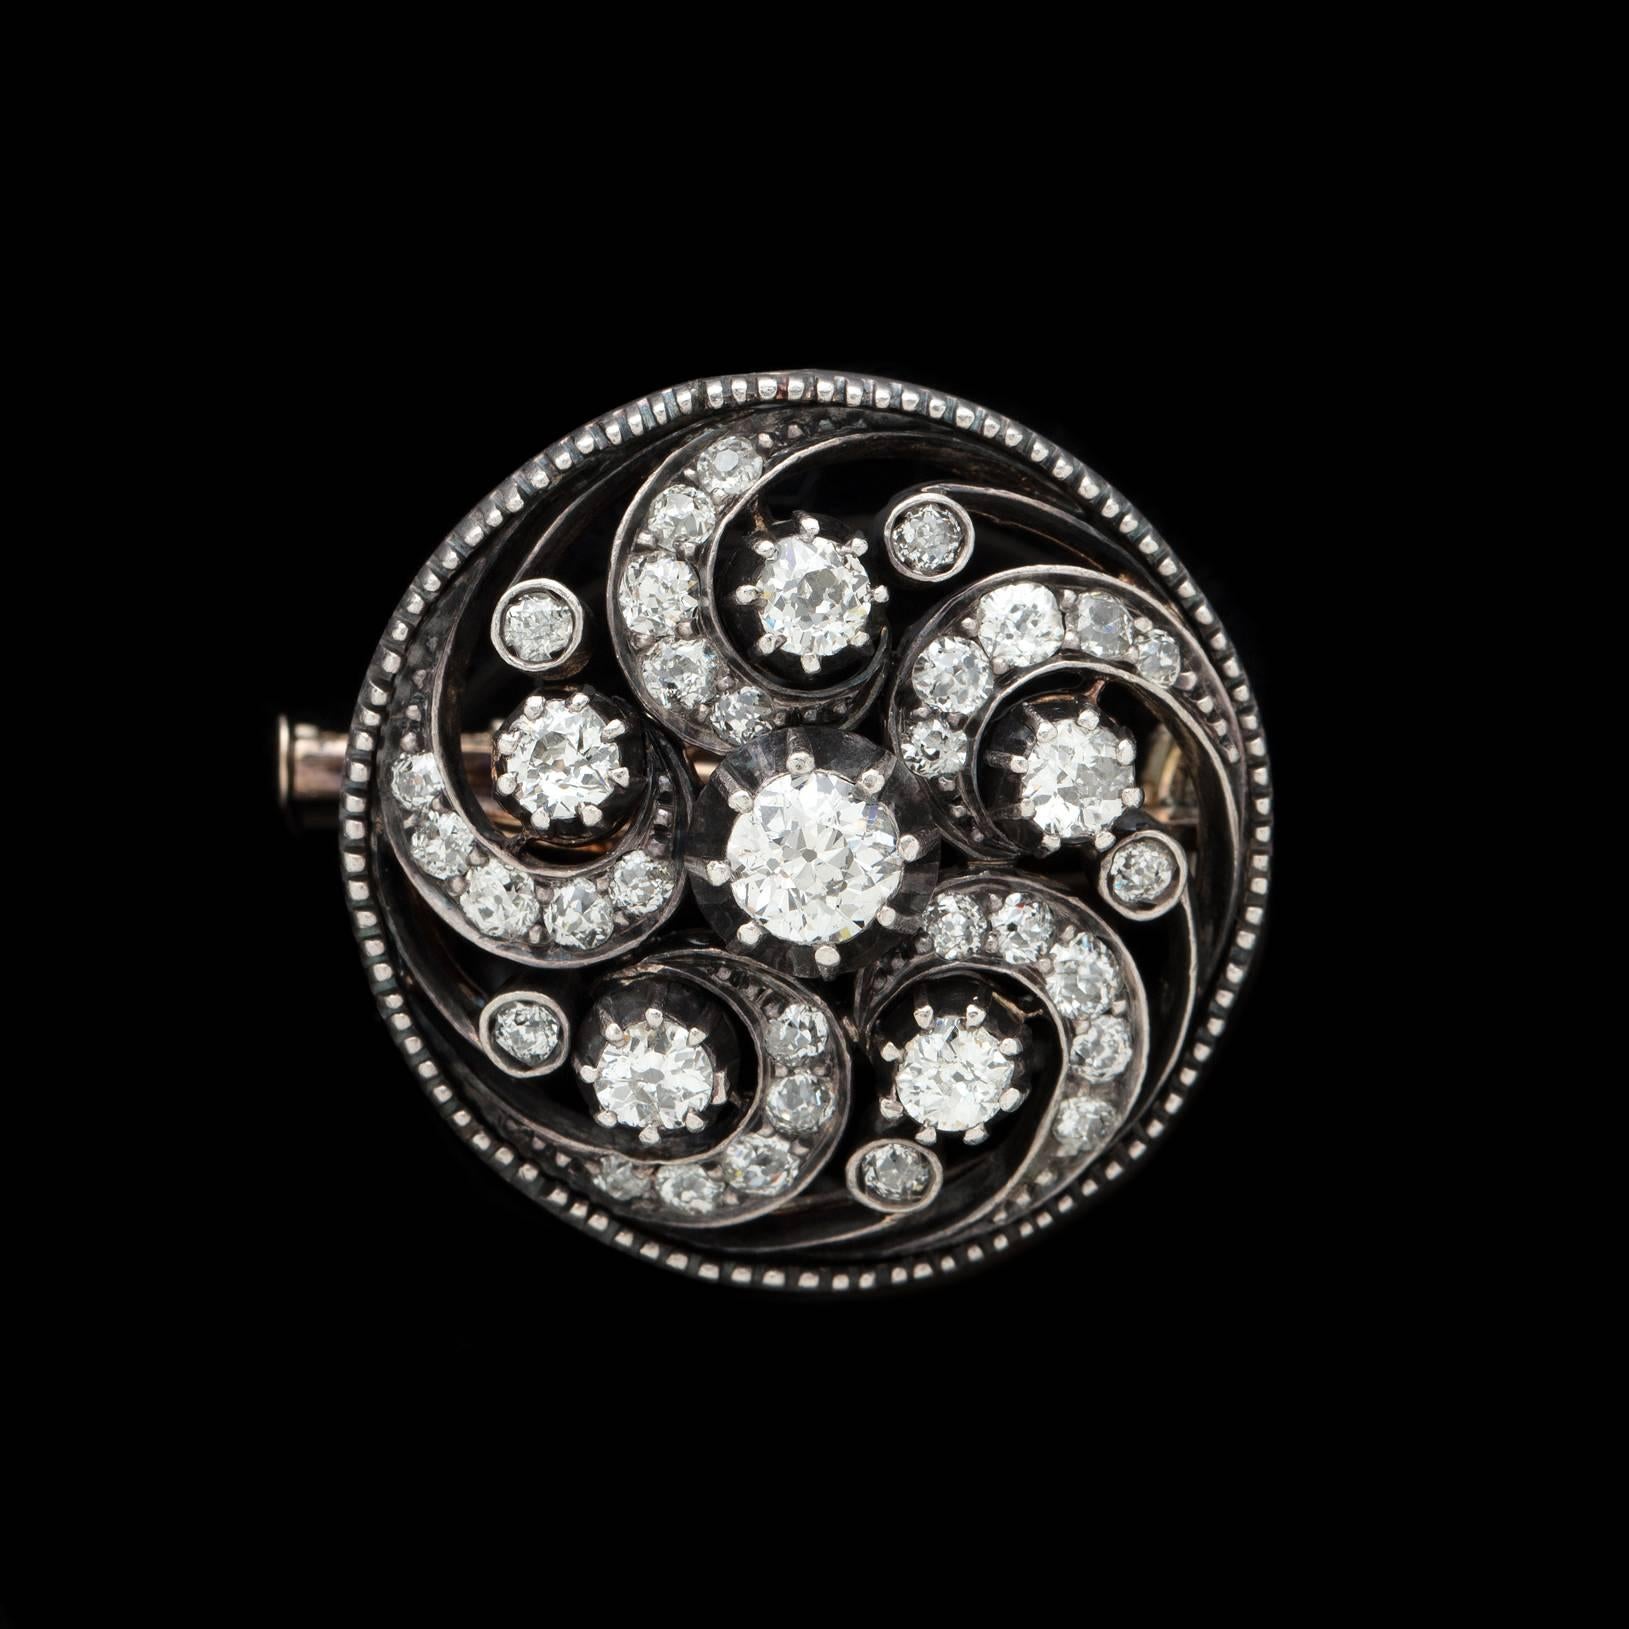 Beautifully crafted swirl motif Diamond Pin featuring approximately 2.25 carats of impressive round diamonds. 36 diamonds are expertly set in a combination of 14 karat yellow gold and silver construction, as was common for the period. The piece